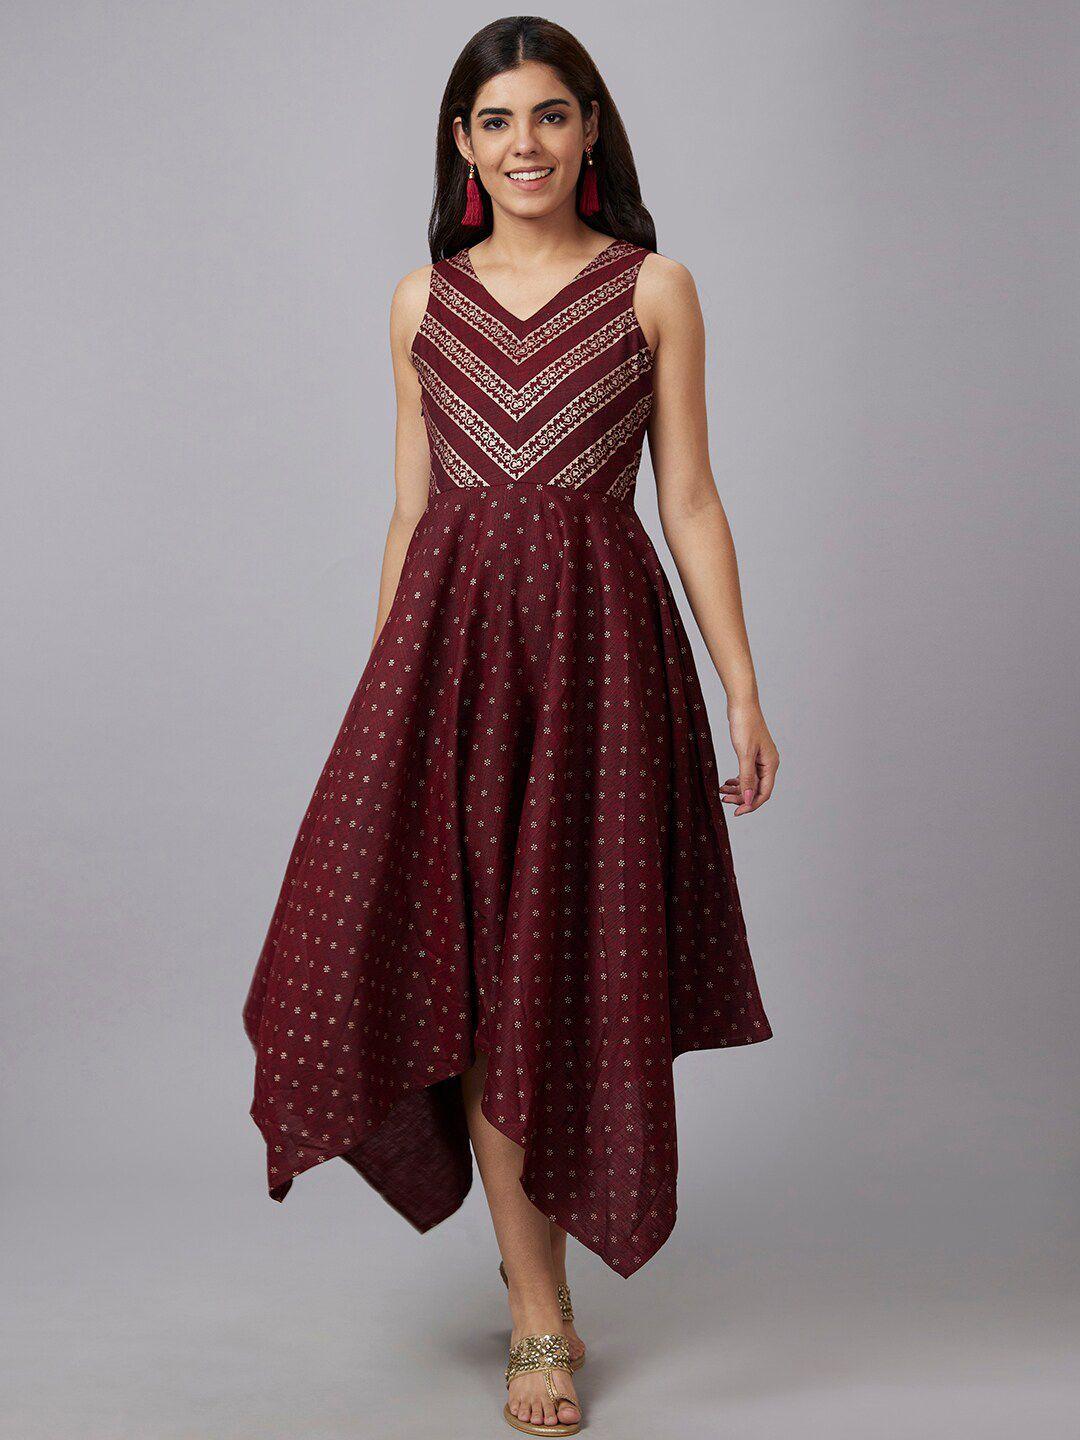 globus-red-ethnic-motifs-printed-v-neck-fit-and-flare-maxi-dress